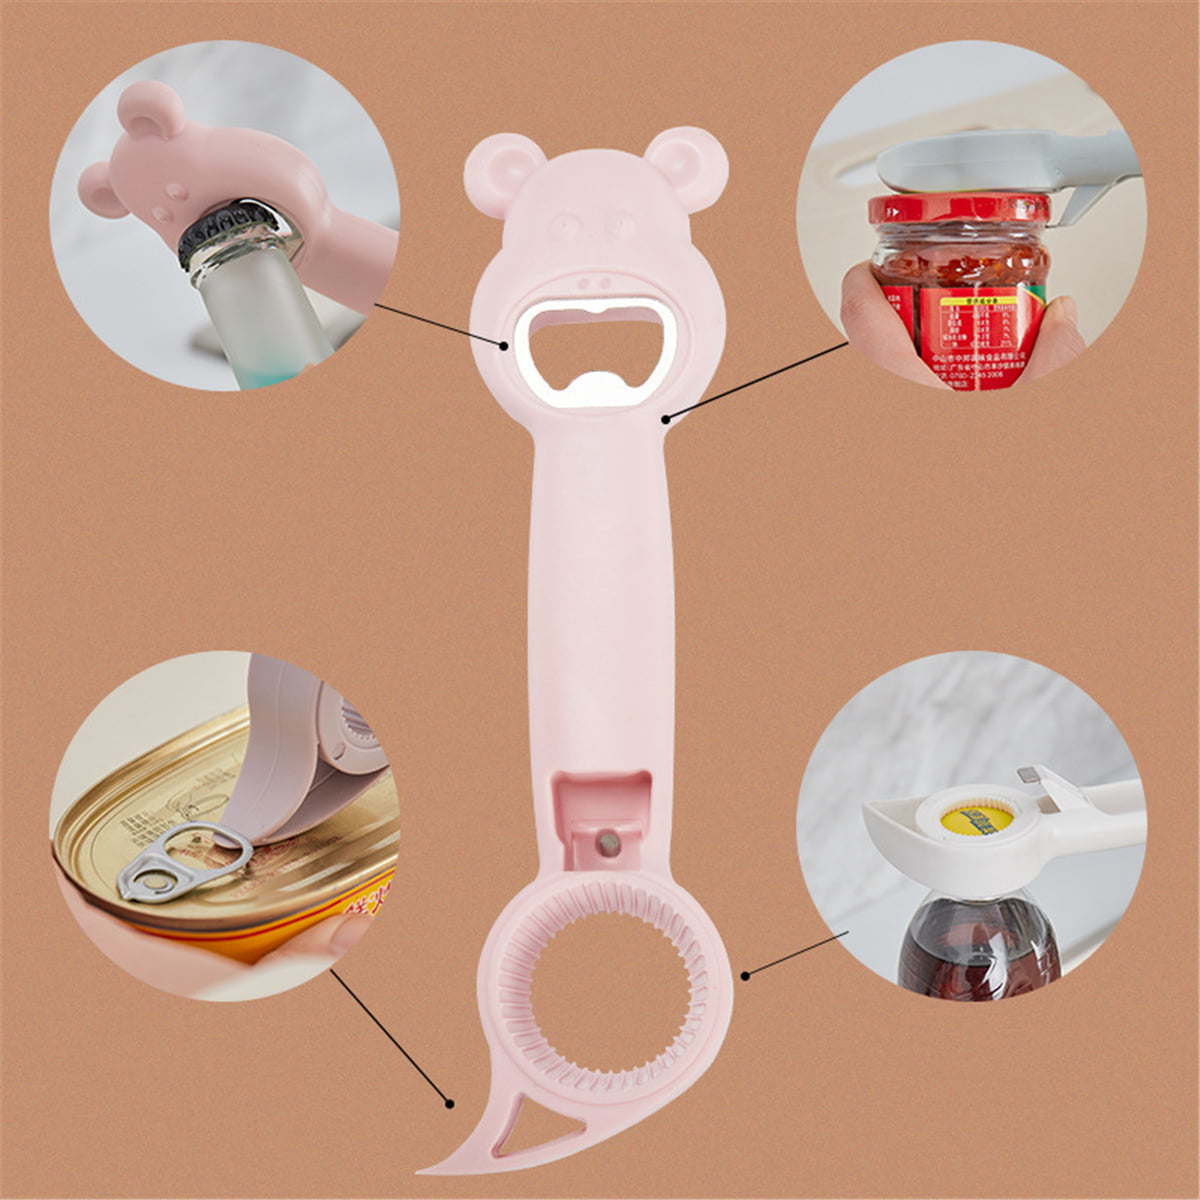 Multifunctional Four In One Openers Antiskid Can Opener Convenient Kitchen Tools 